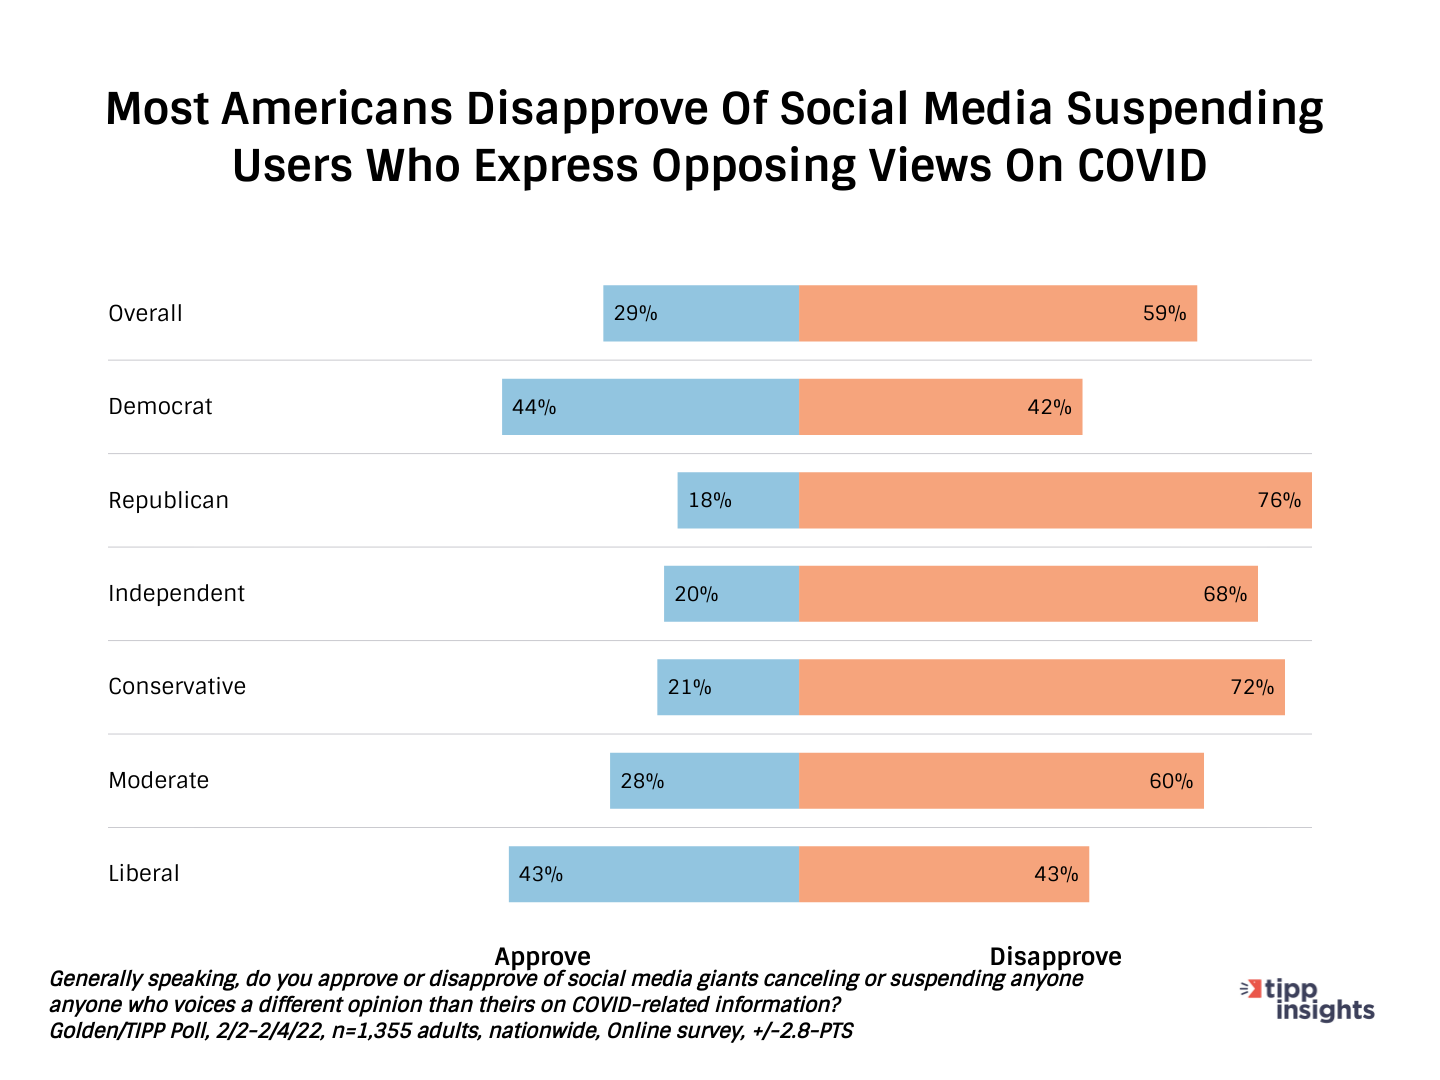 Golden/TIPP Poll Results: Most americans disapprove of social media suspending users who express opposing views on COVID19